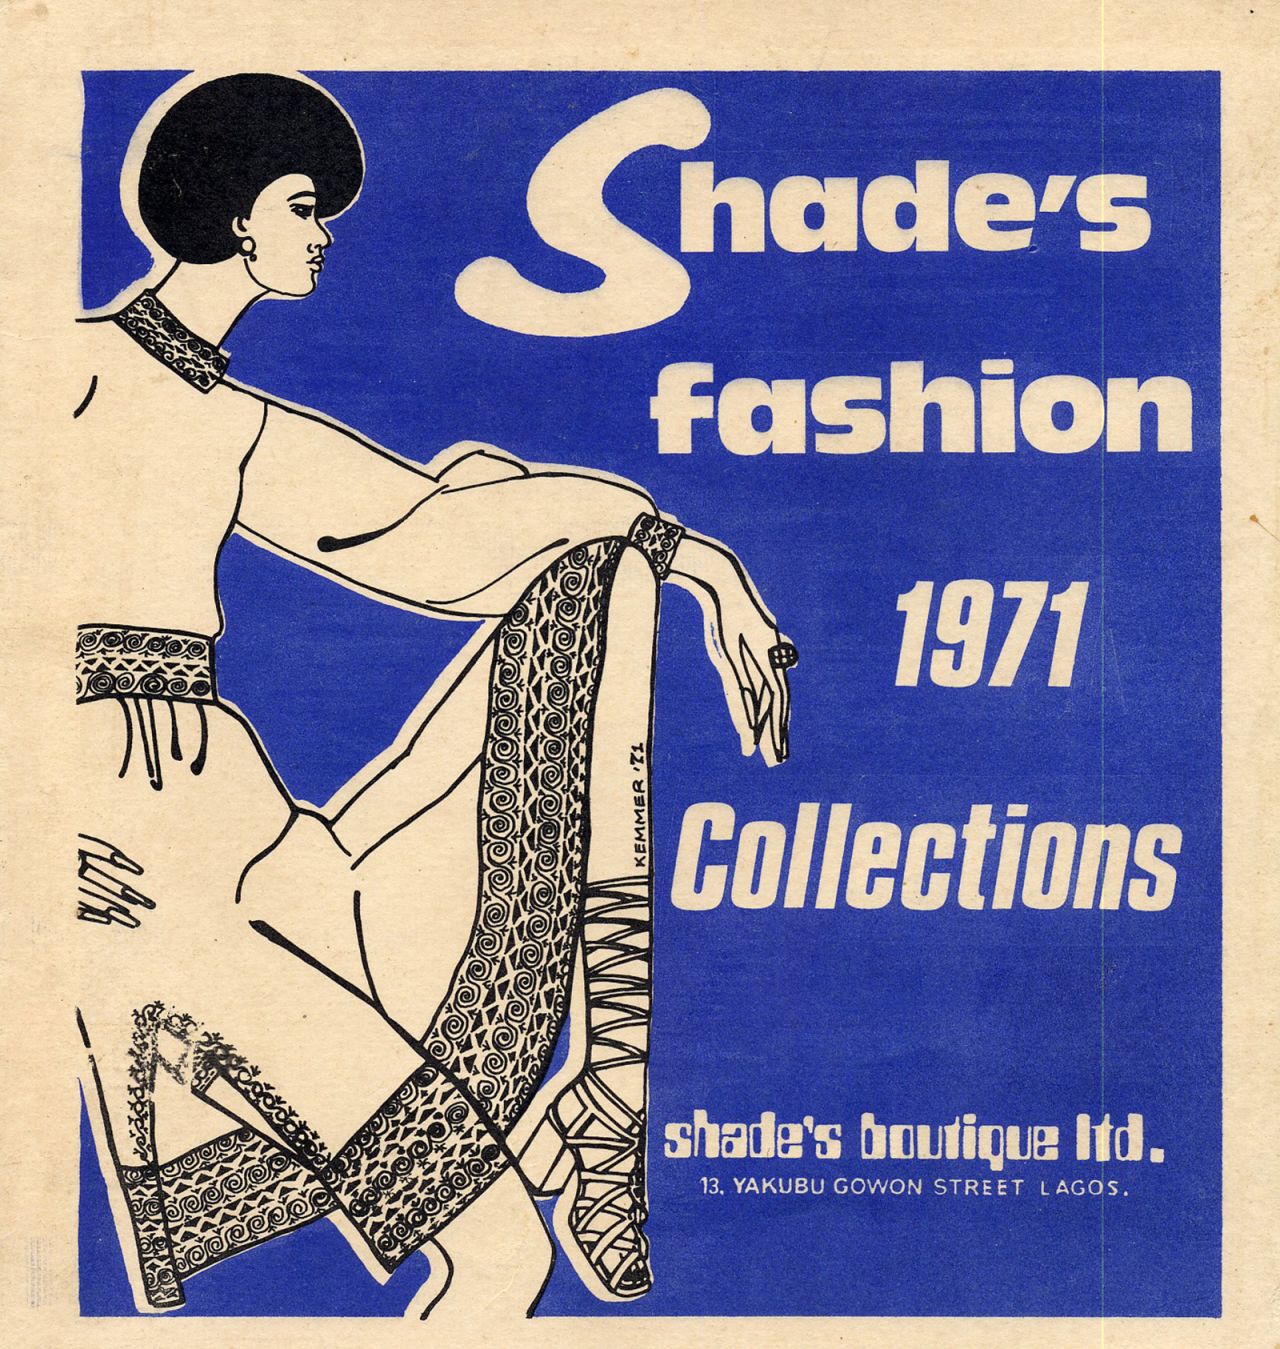 A flyer for Shade's Boutique, 1971.